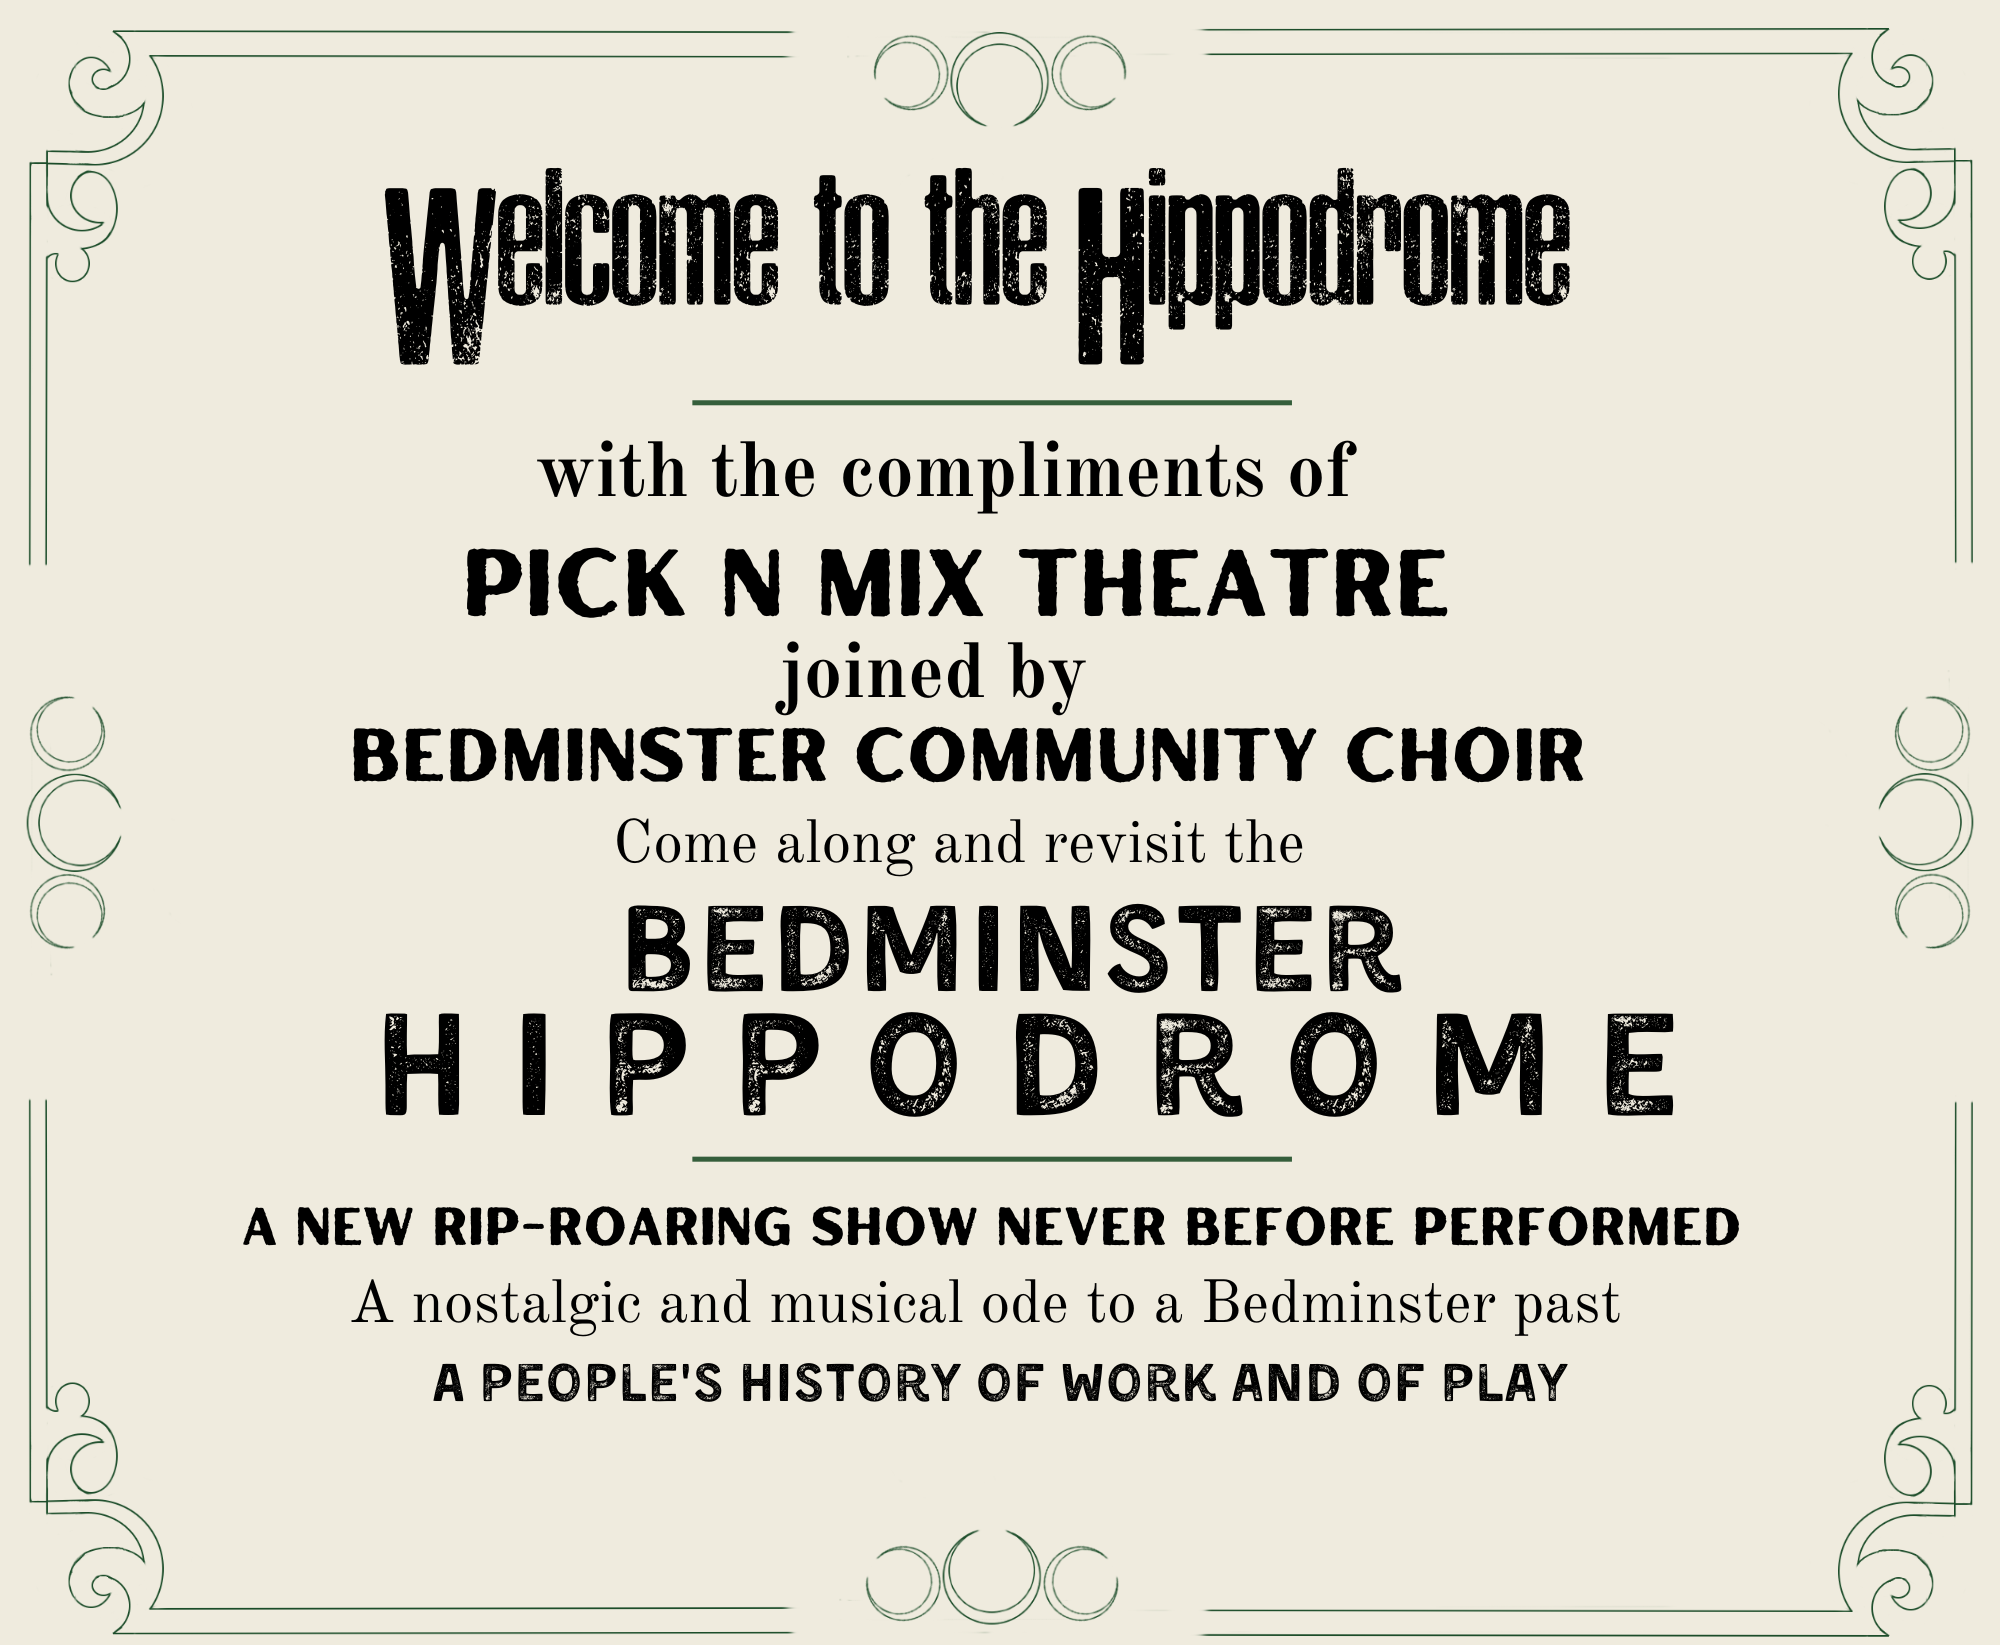 Welcome to the Hippodrome, with the compliments of Pick N Mix Theatre joined by Bedminster Communtiy Choir come along and revisit the Bedminster Hippdrome a new rip-roaring show never before performed. A nostalglic and musical ode to a Bedminster past, a people's history of work and play